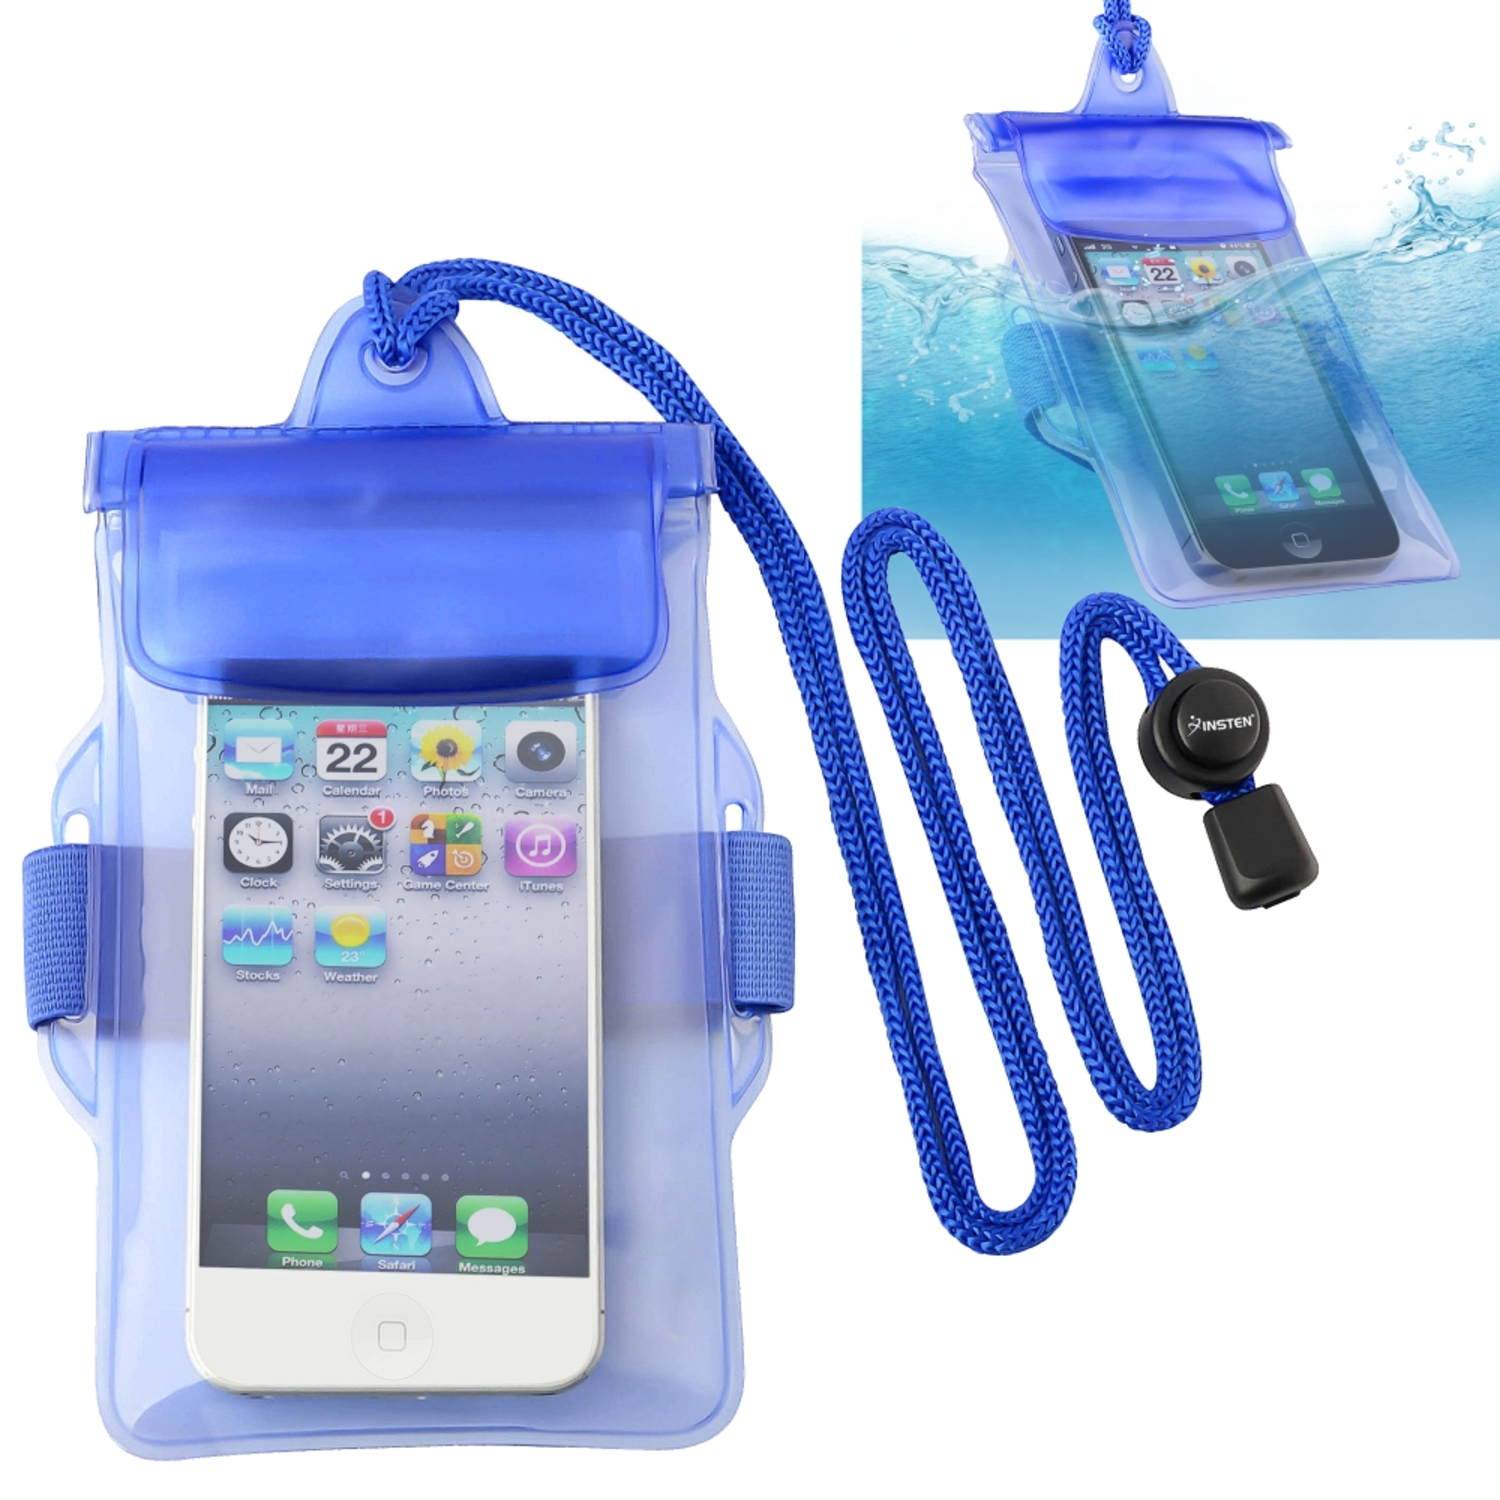 Insten 449477 Waterproof Case Dry Bag Pouch for iPhone SE 5 5S 5C 4S iPod Touch, Blue